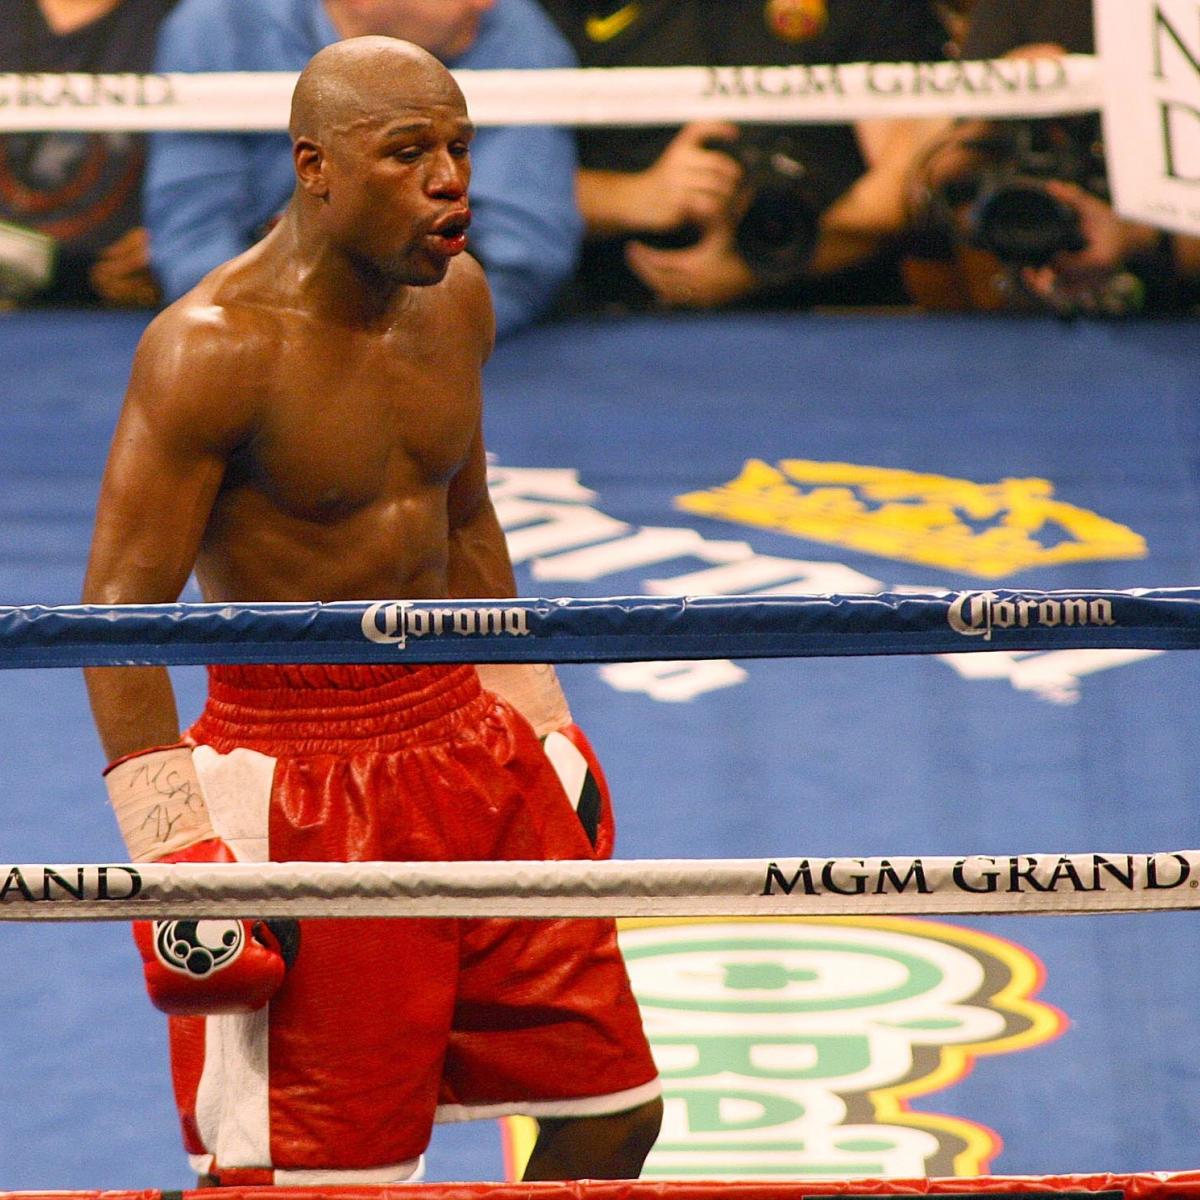 As Floyd Mayweather Jr. Steps Into Ring, He Turns It Into a